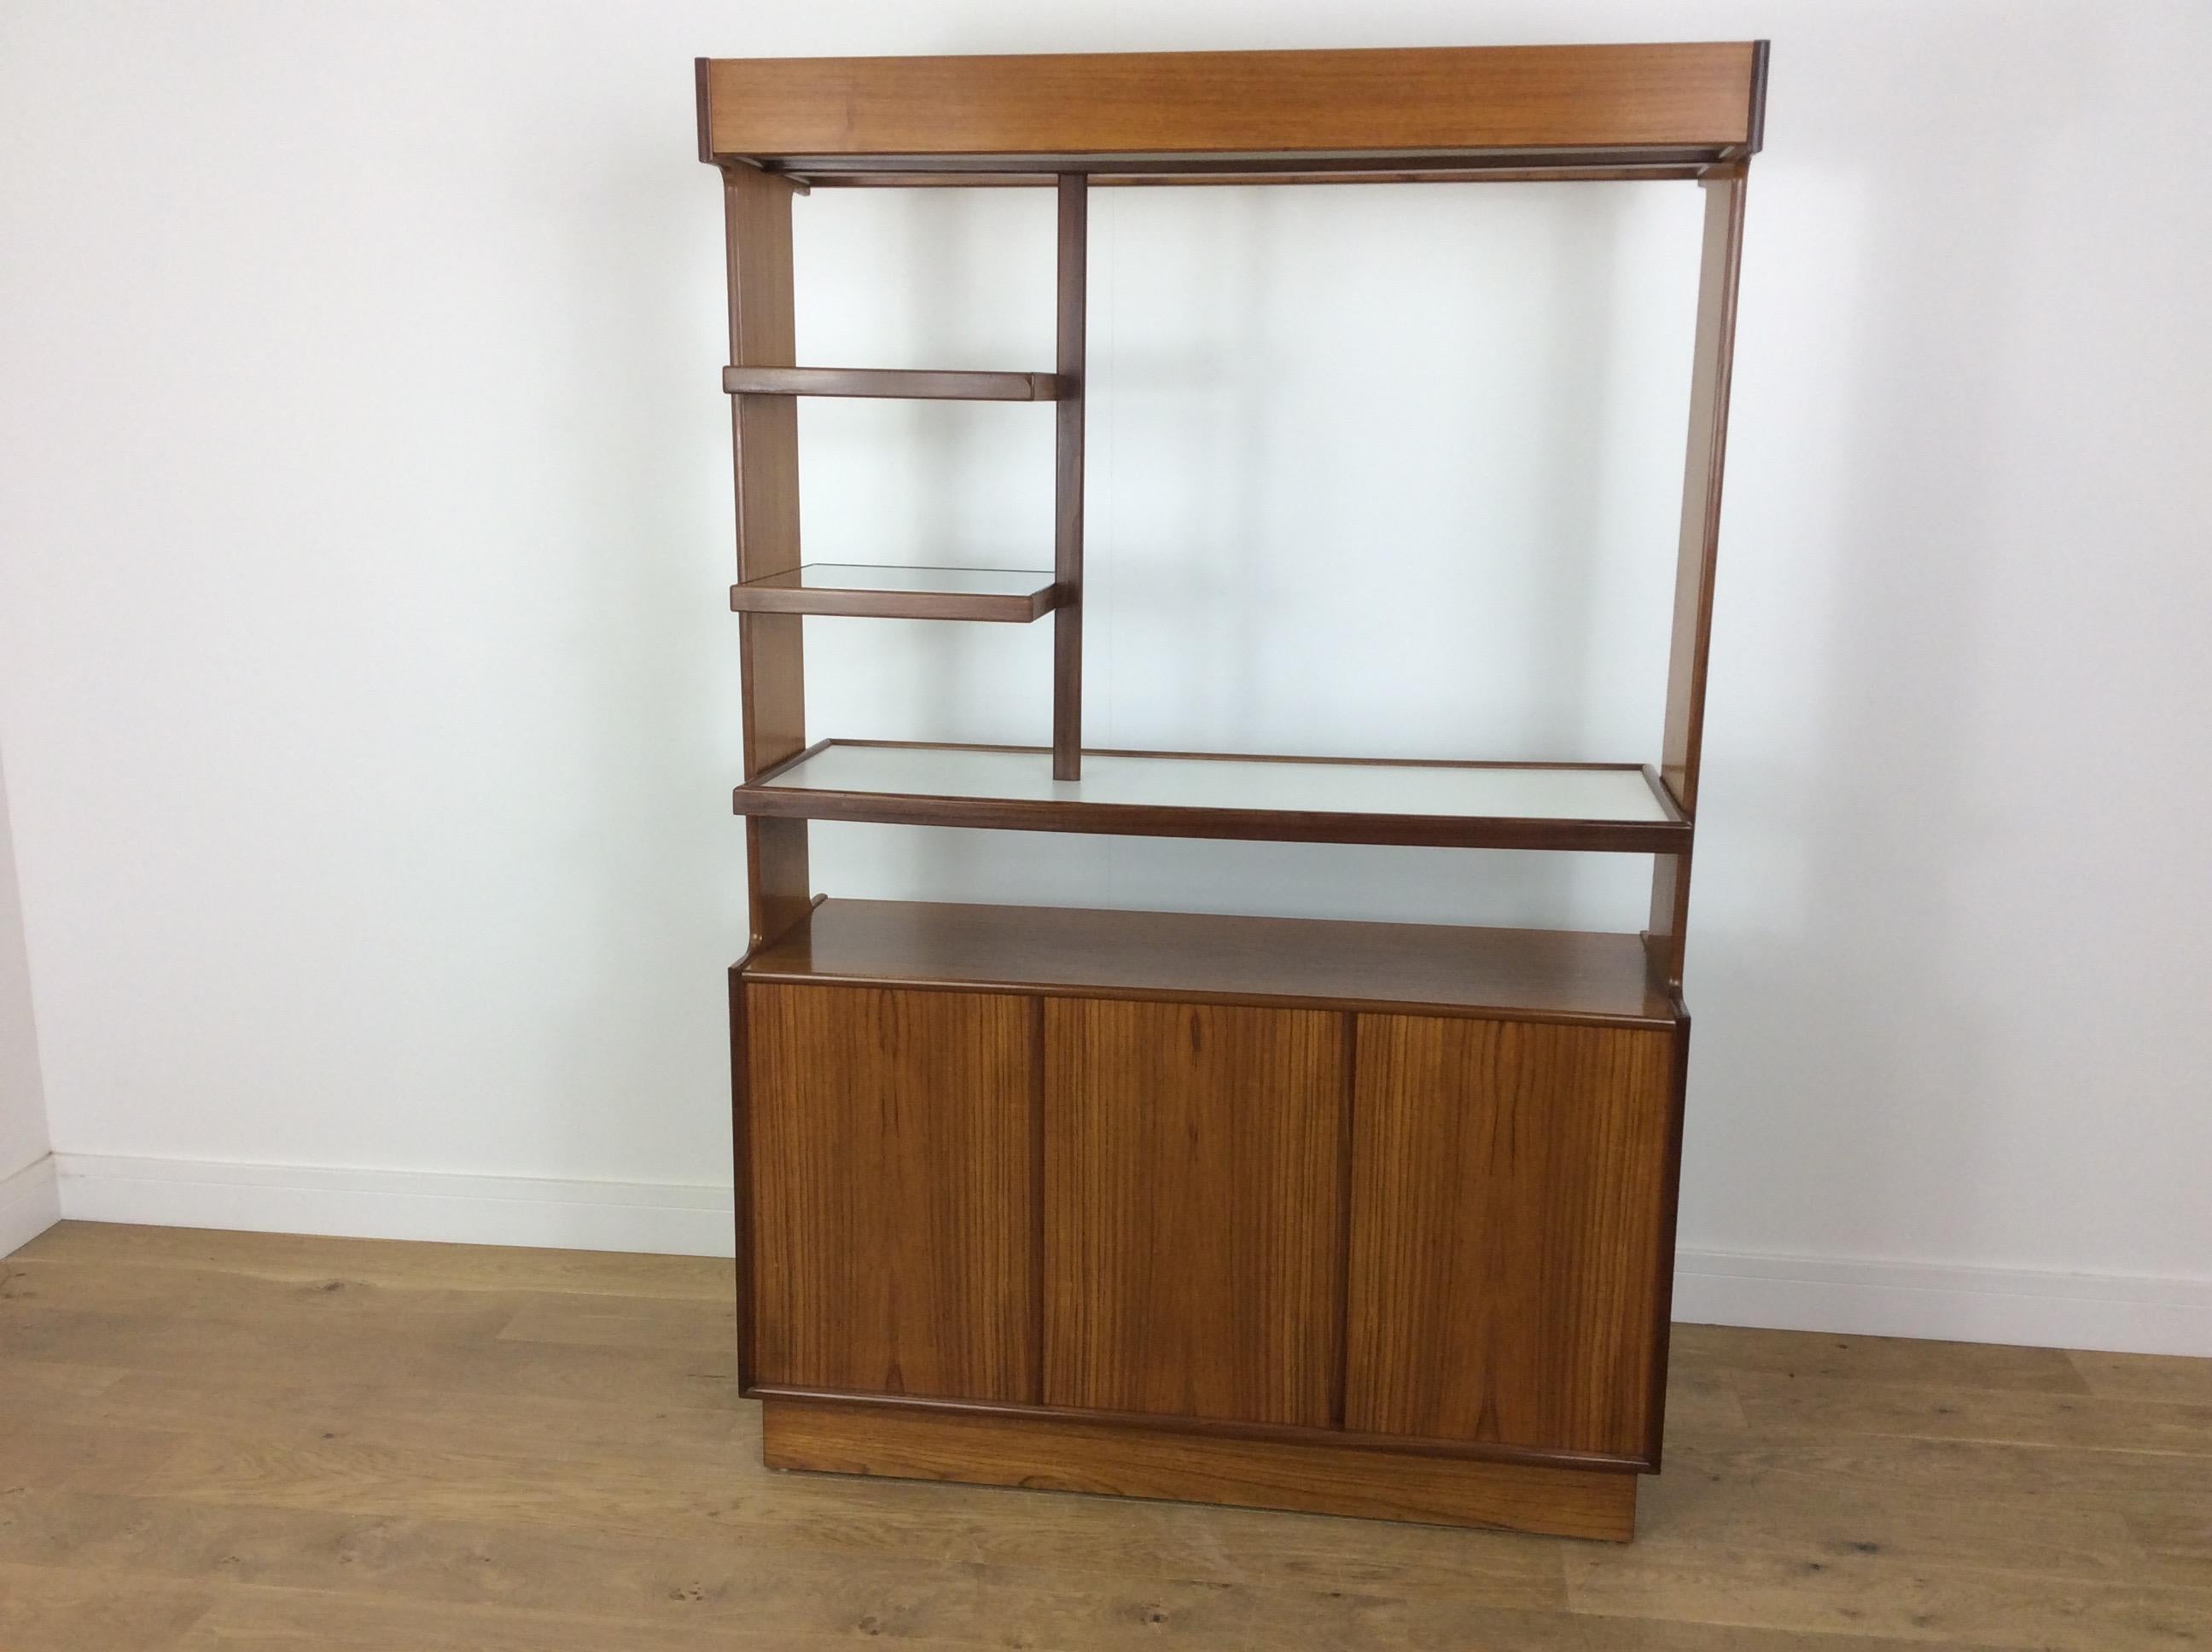 20th Century Midcentury Room Divider or Wall Unit